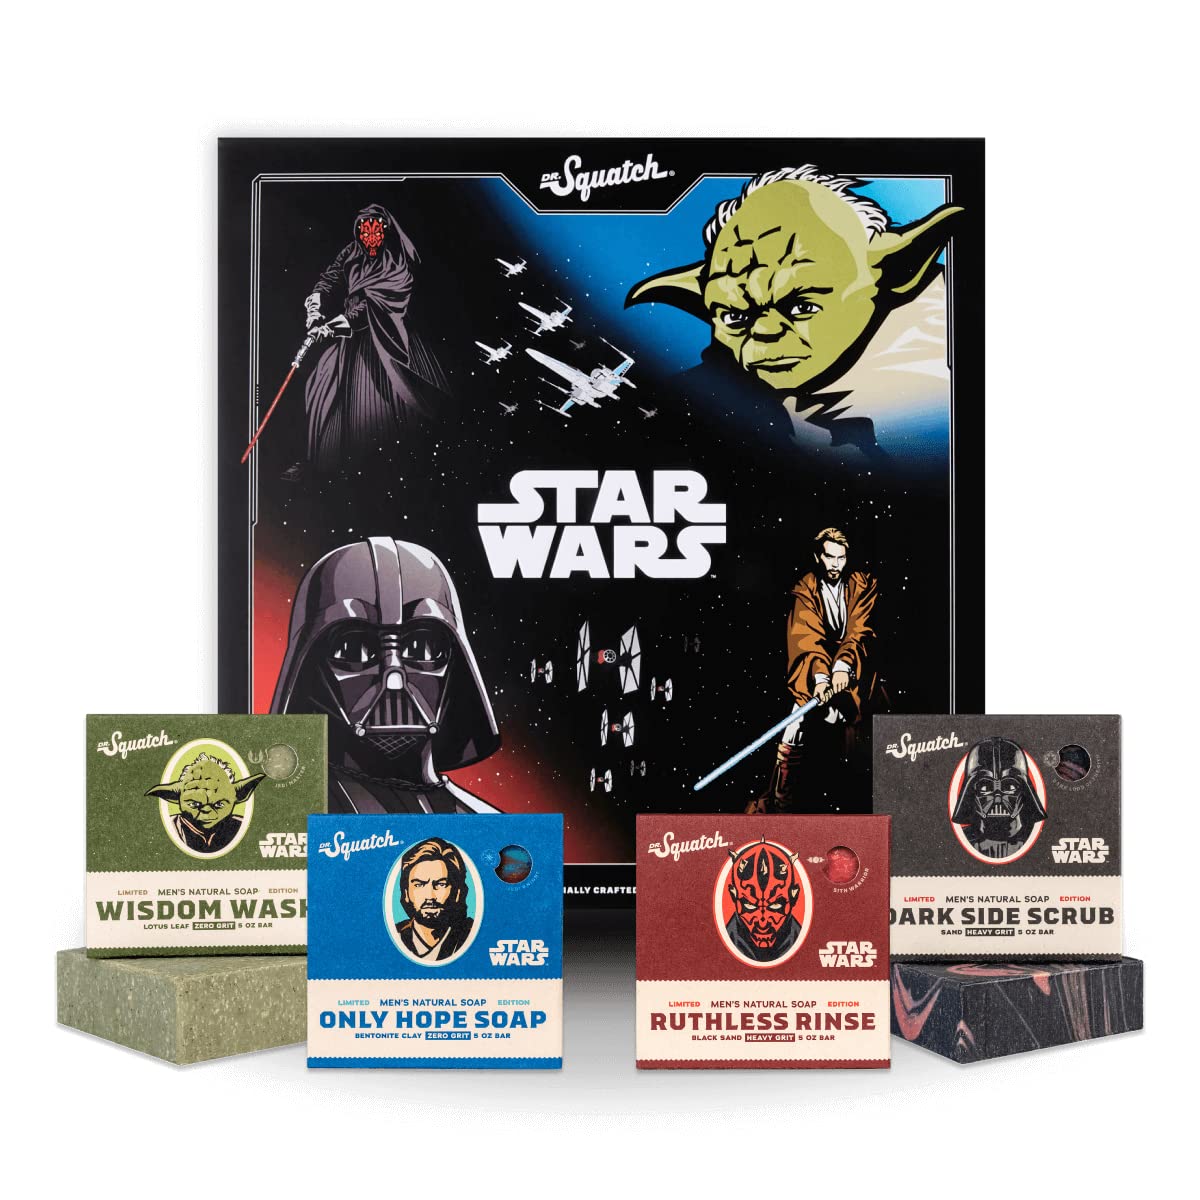 Dr Squatch "STAR WARS COLLECTION" Limited Edition 4 PIECE BOX SET!